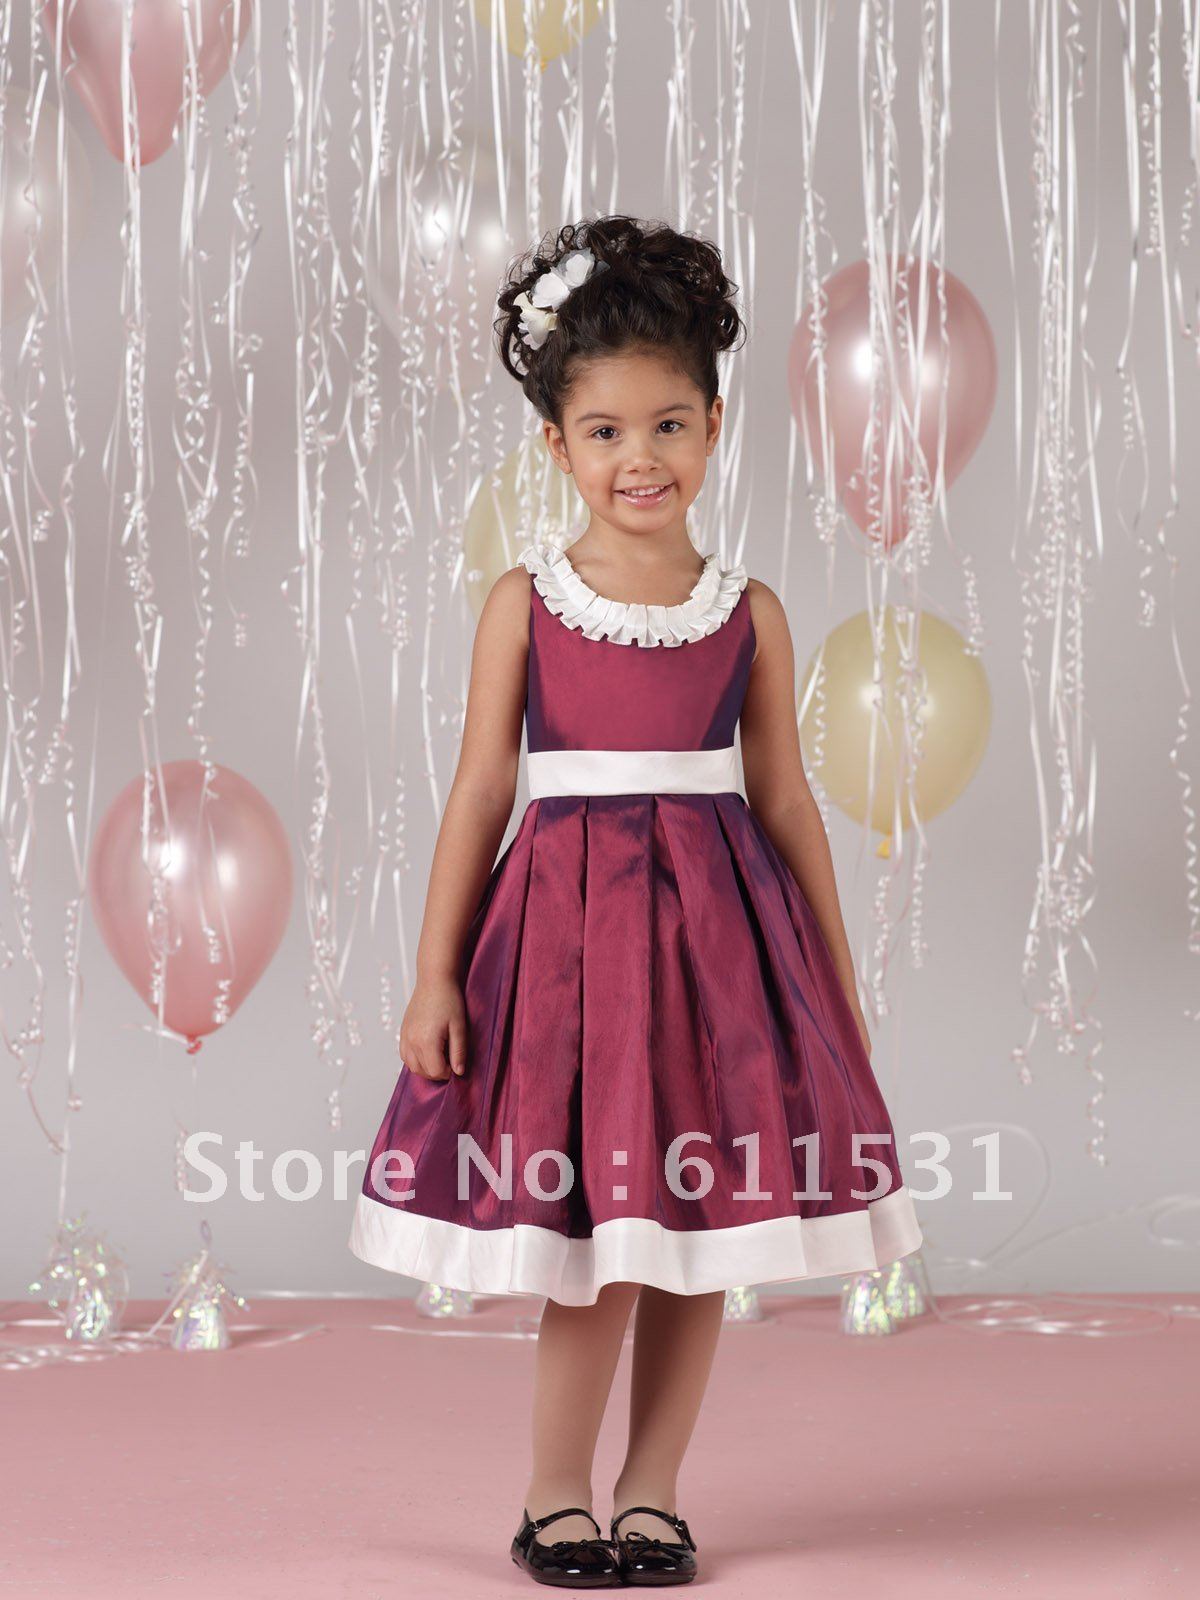 New Arrival 2012 !!Lovely Princess Jewel Bow Knot Ankle Length Satin Flower Girl Dresses Free Shipping Custom Made